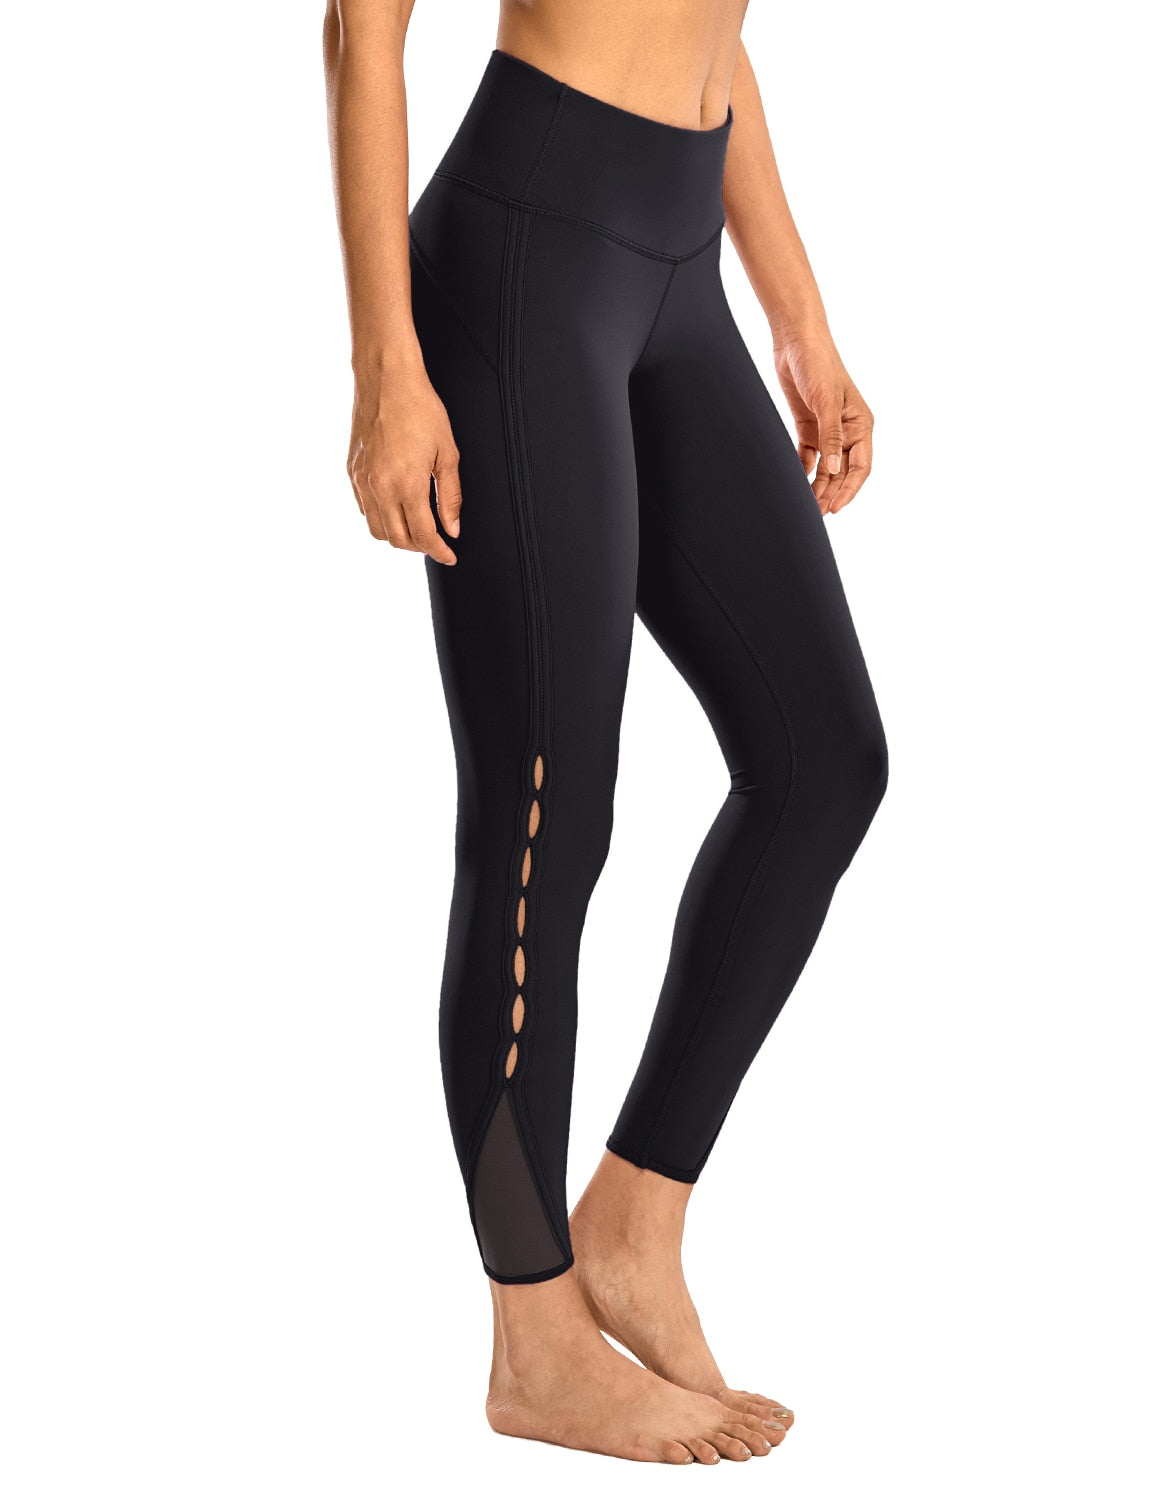 High Waisted Workout Pants 7/8 Yoga Leggings with Hole - Naked Feeling - 25 Inches